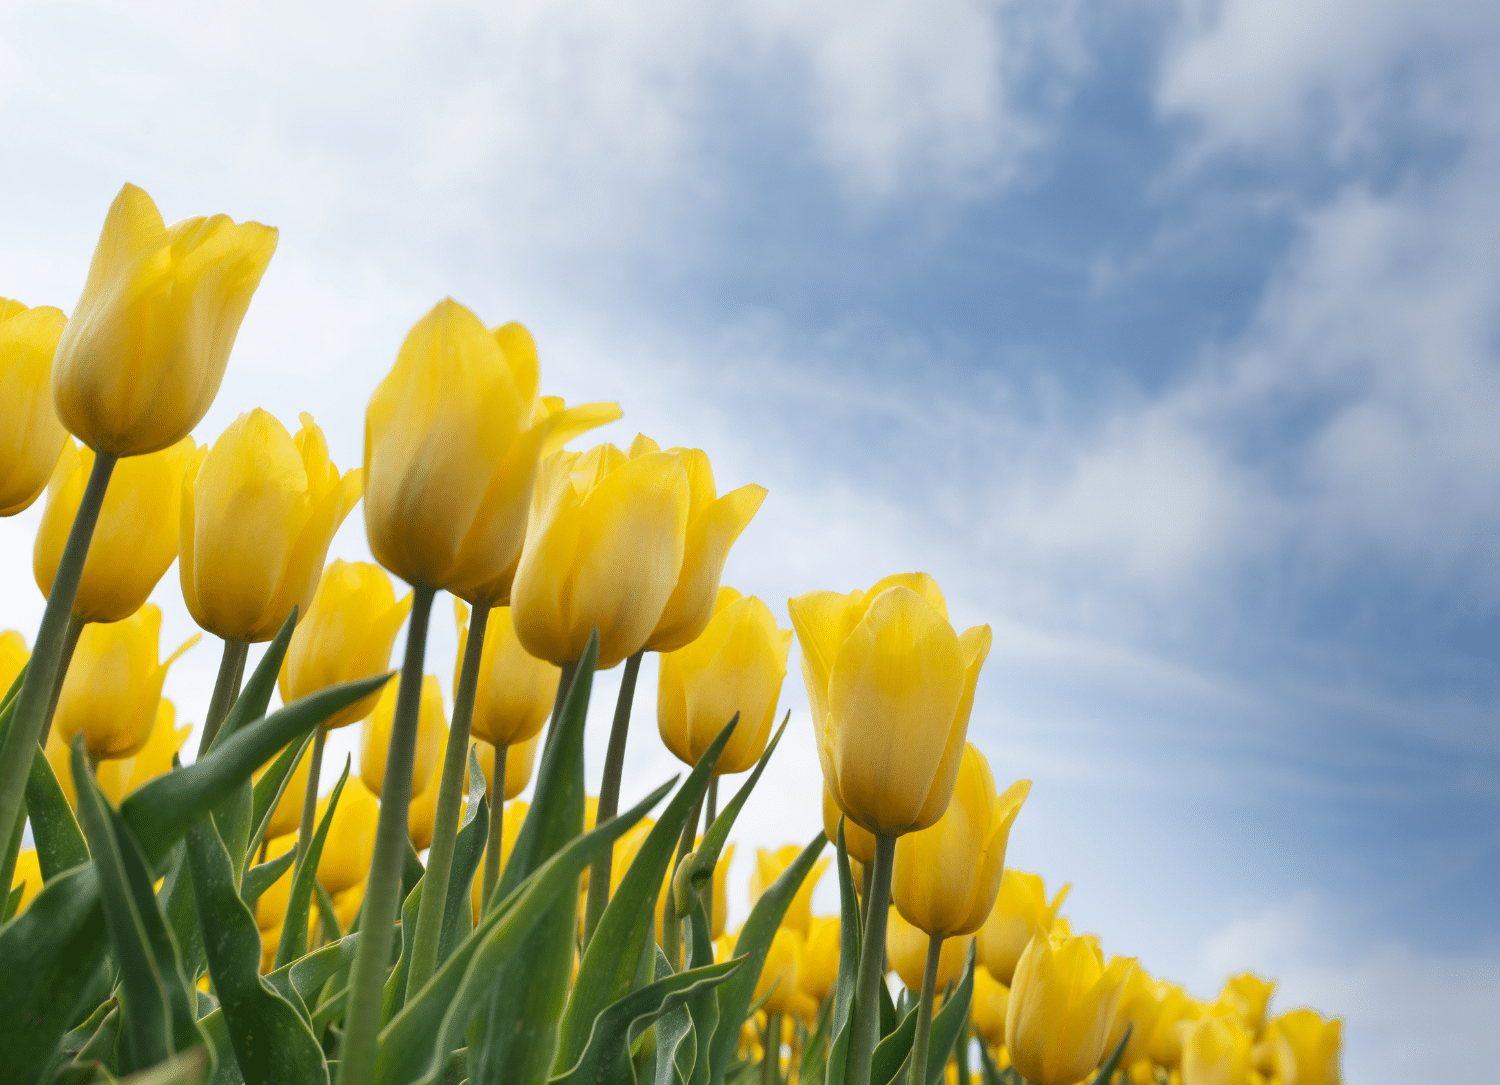 horizontal photo of yellow tulips against a blue sky with a fair cloud covering